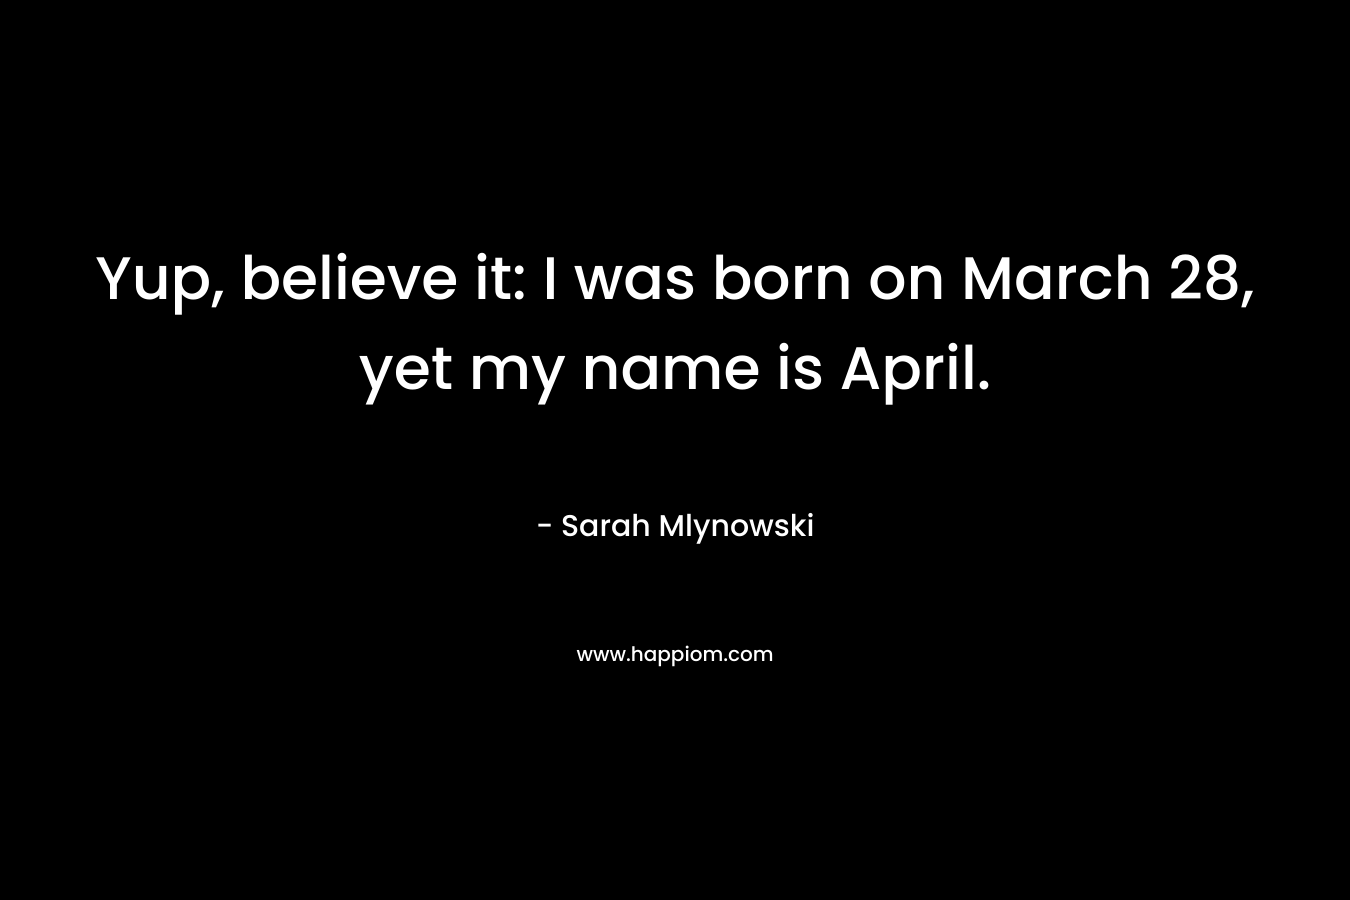 Yup, believe it: I was born on March 28, yet my name is April. – Sarah Mlynowski